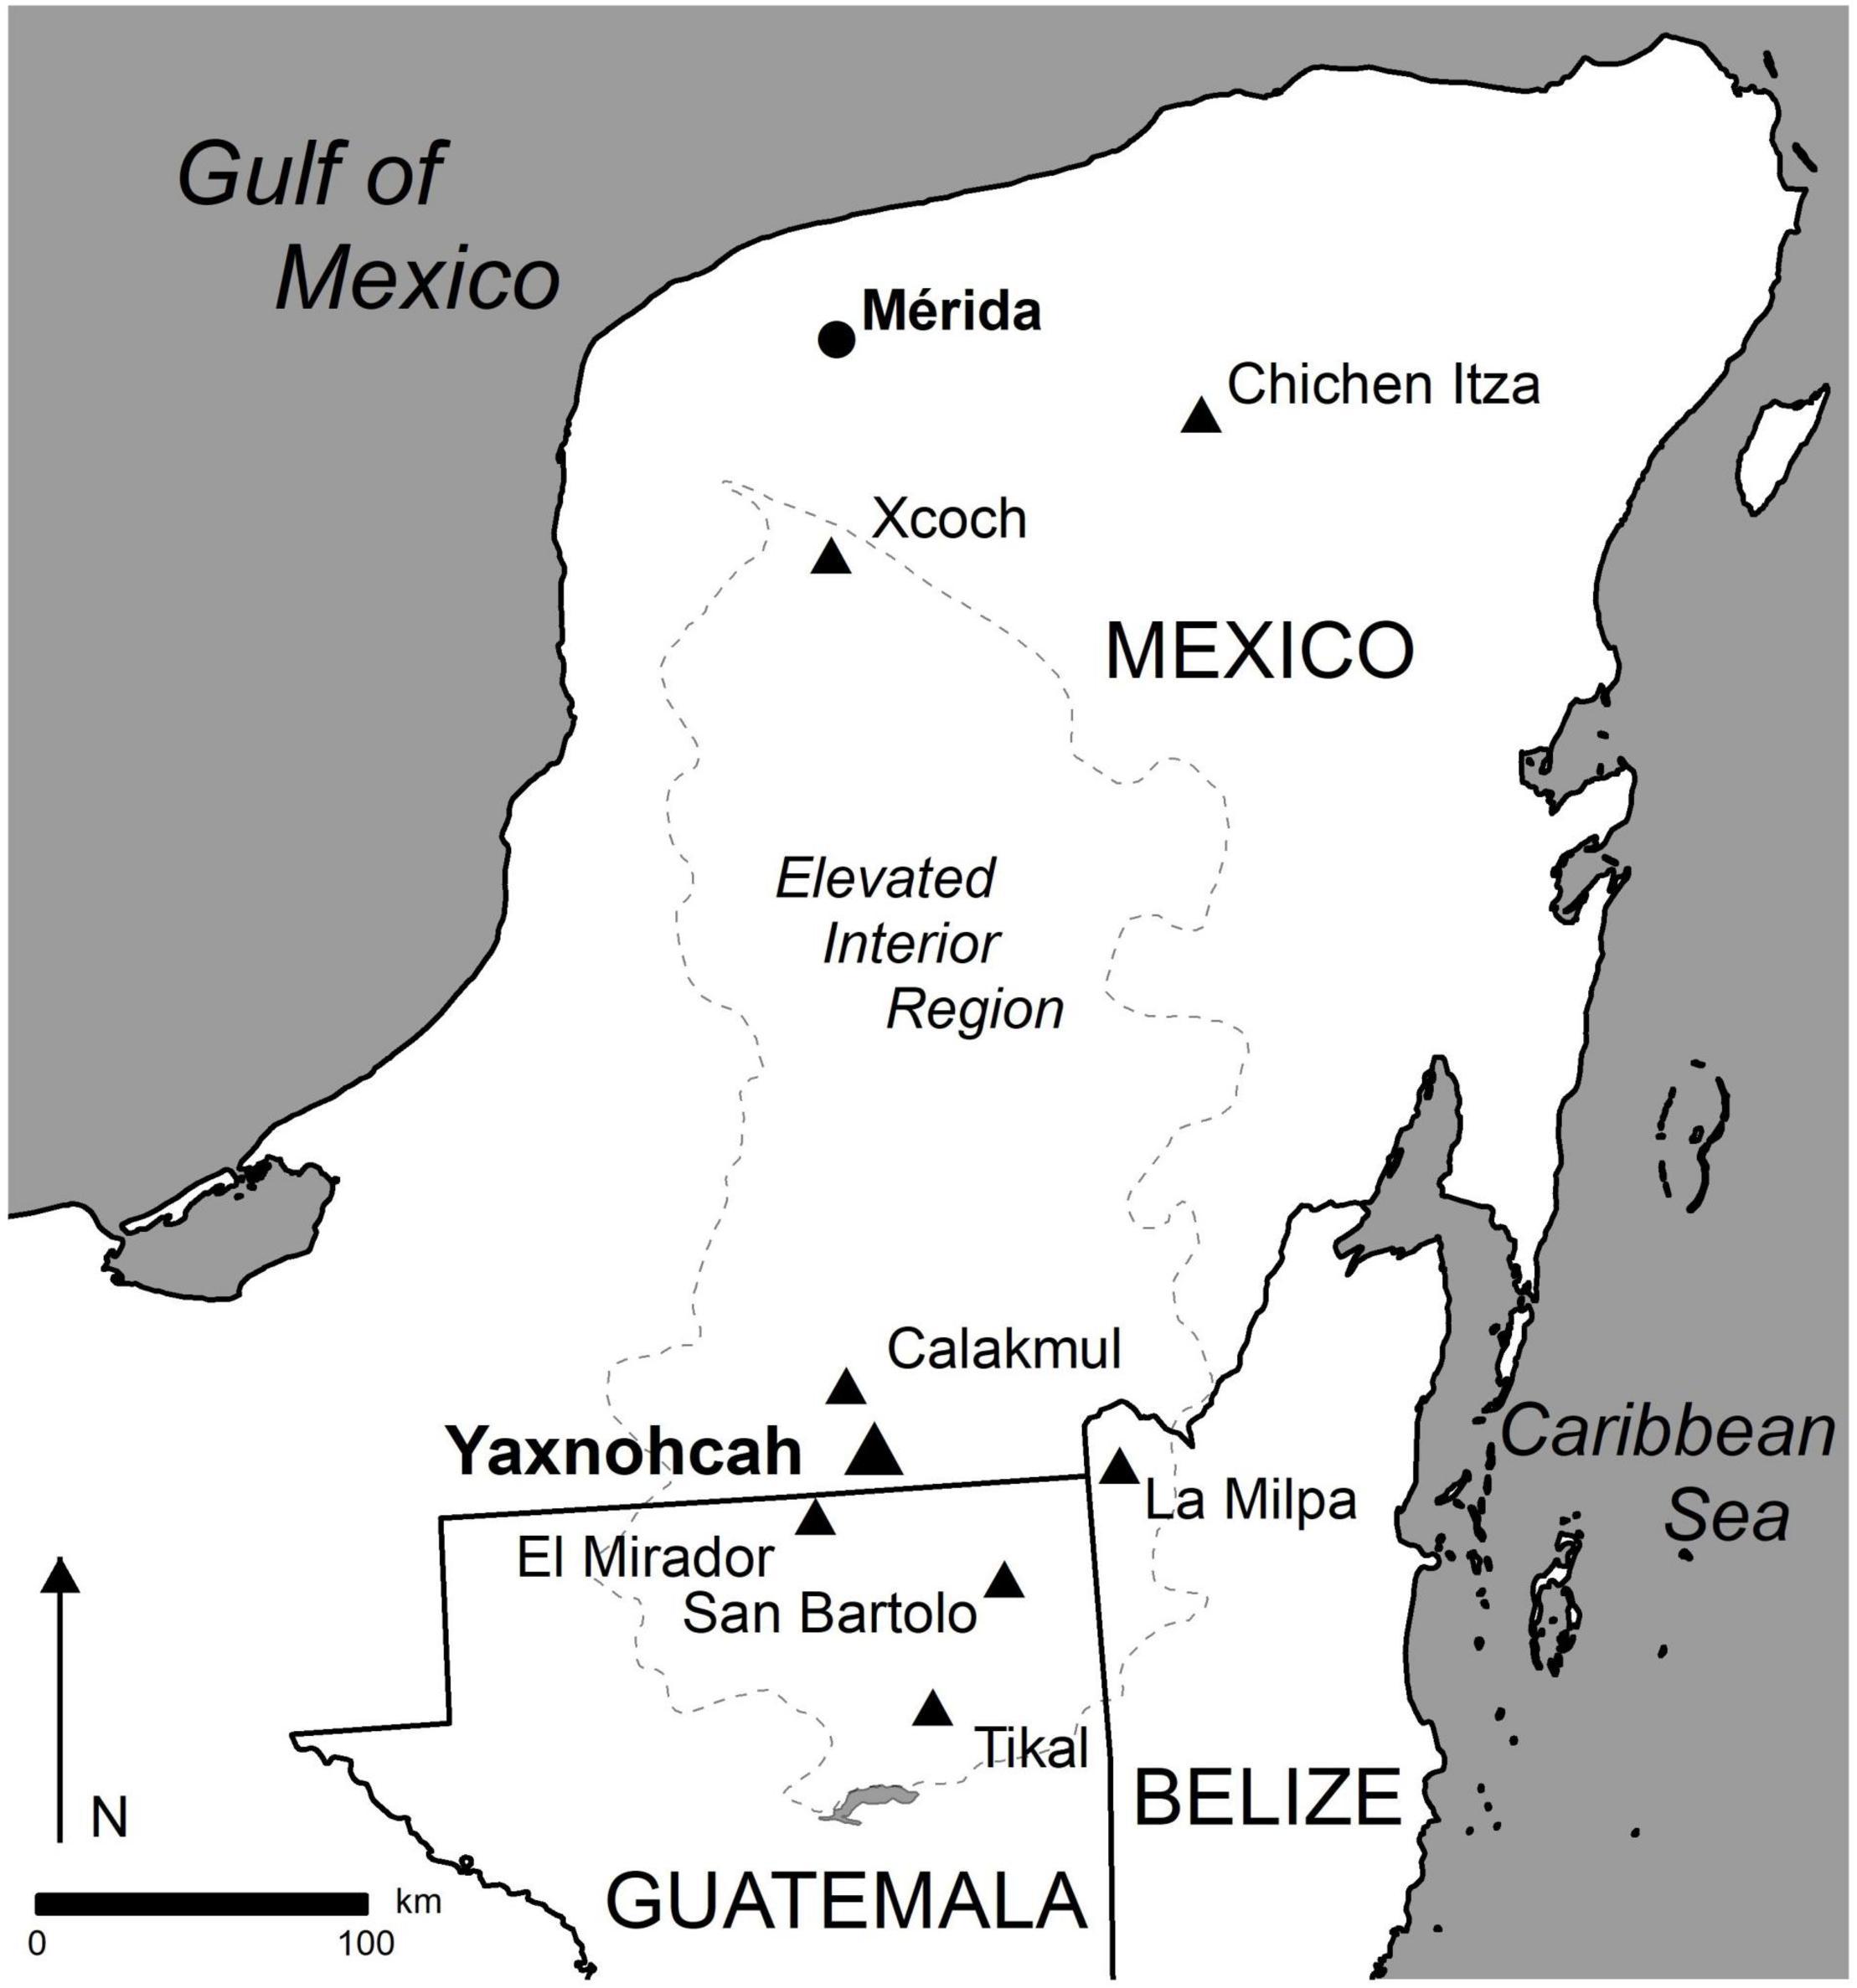 Frontiers  Paleoecological Studies at the Ancient Maya Center of Yaxnohcah  Using Analyses of Pollen, Environmental DNA, and Plant Macroremains